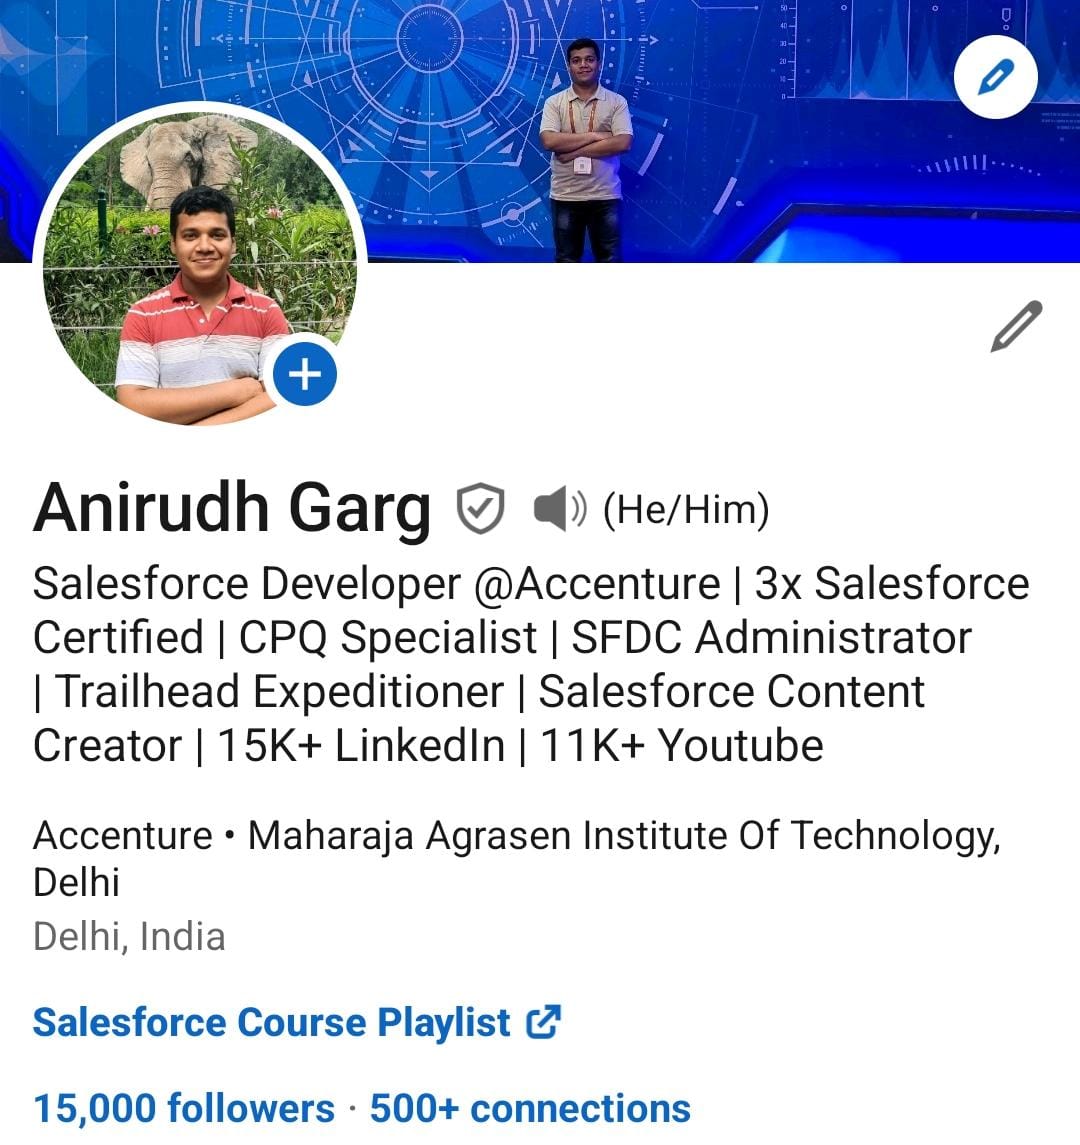 Crossed 15,000 followers on #LinkedIn ...! Let's connect if we are yet to do so linkedin.com/in/anirudhgarg… #AnirudhGarg #LinkedinForCreators #Salesforce